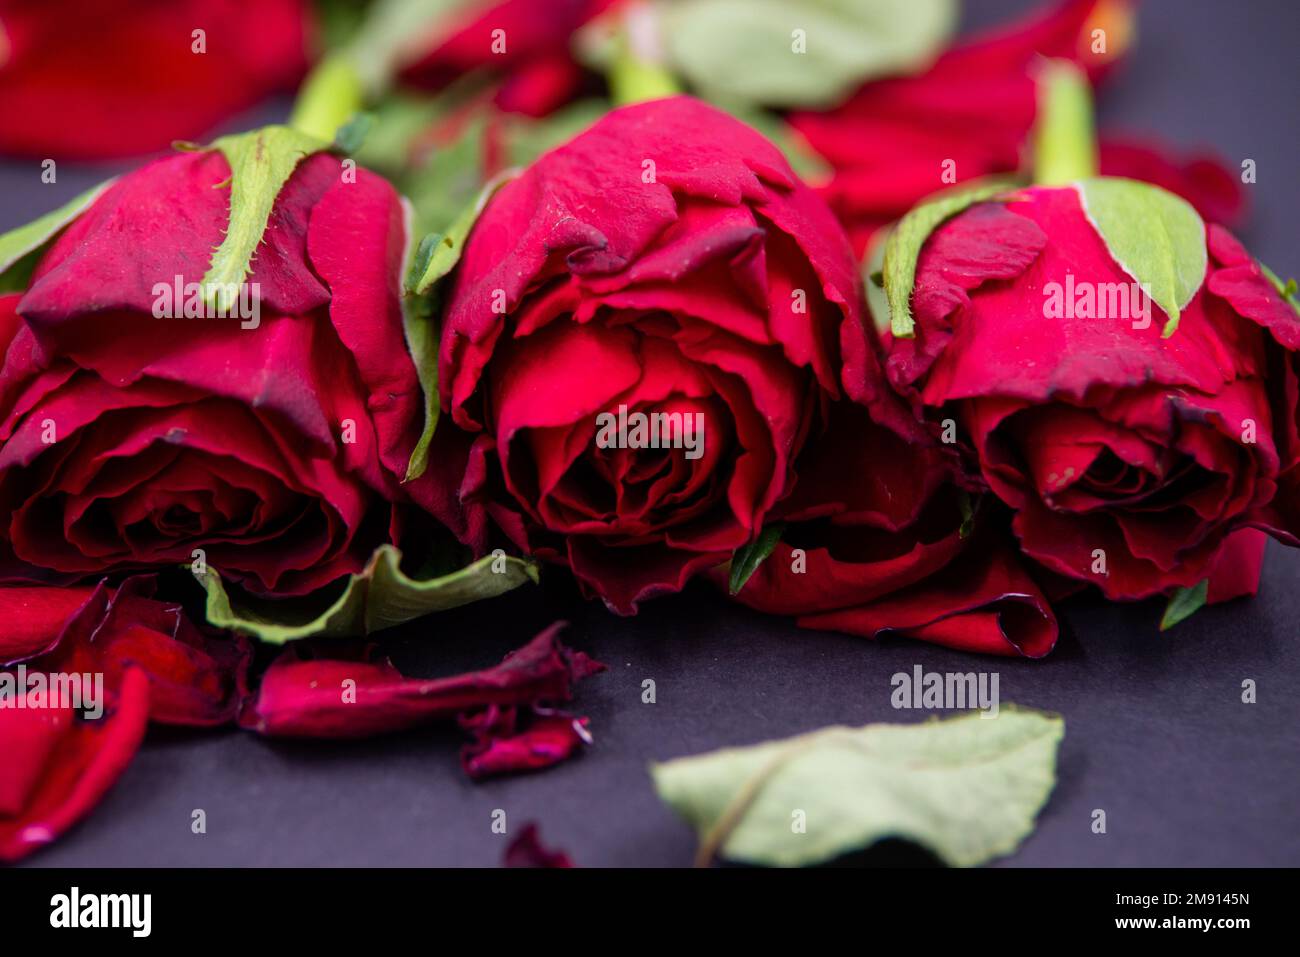 Close-up of red rose flowers with fallen leaves on black background. Stock Photo